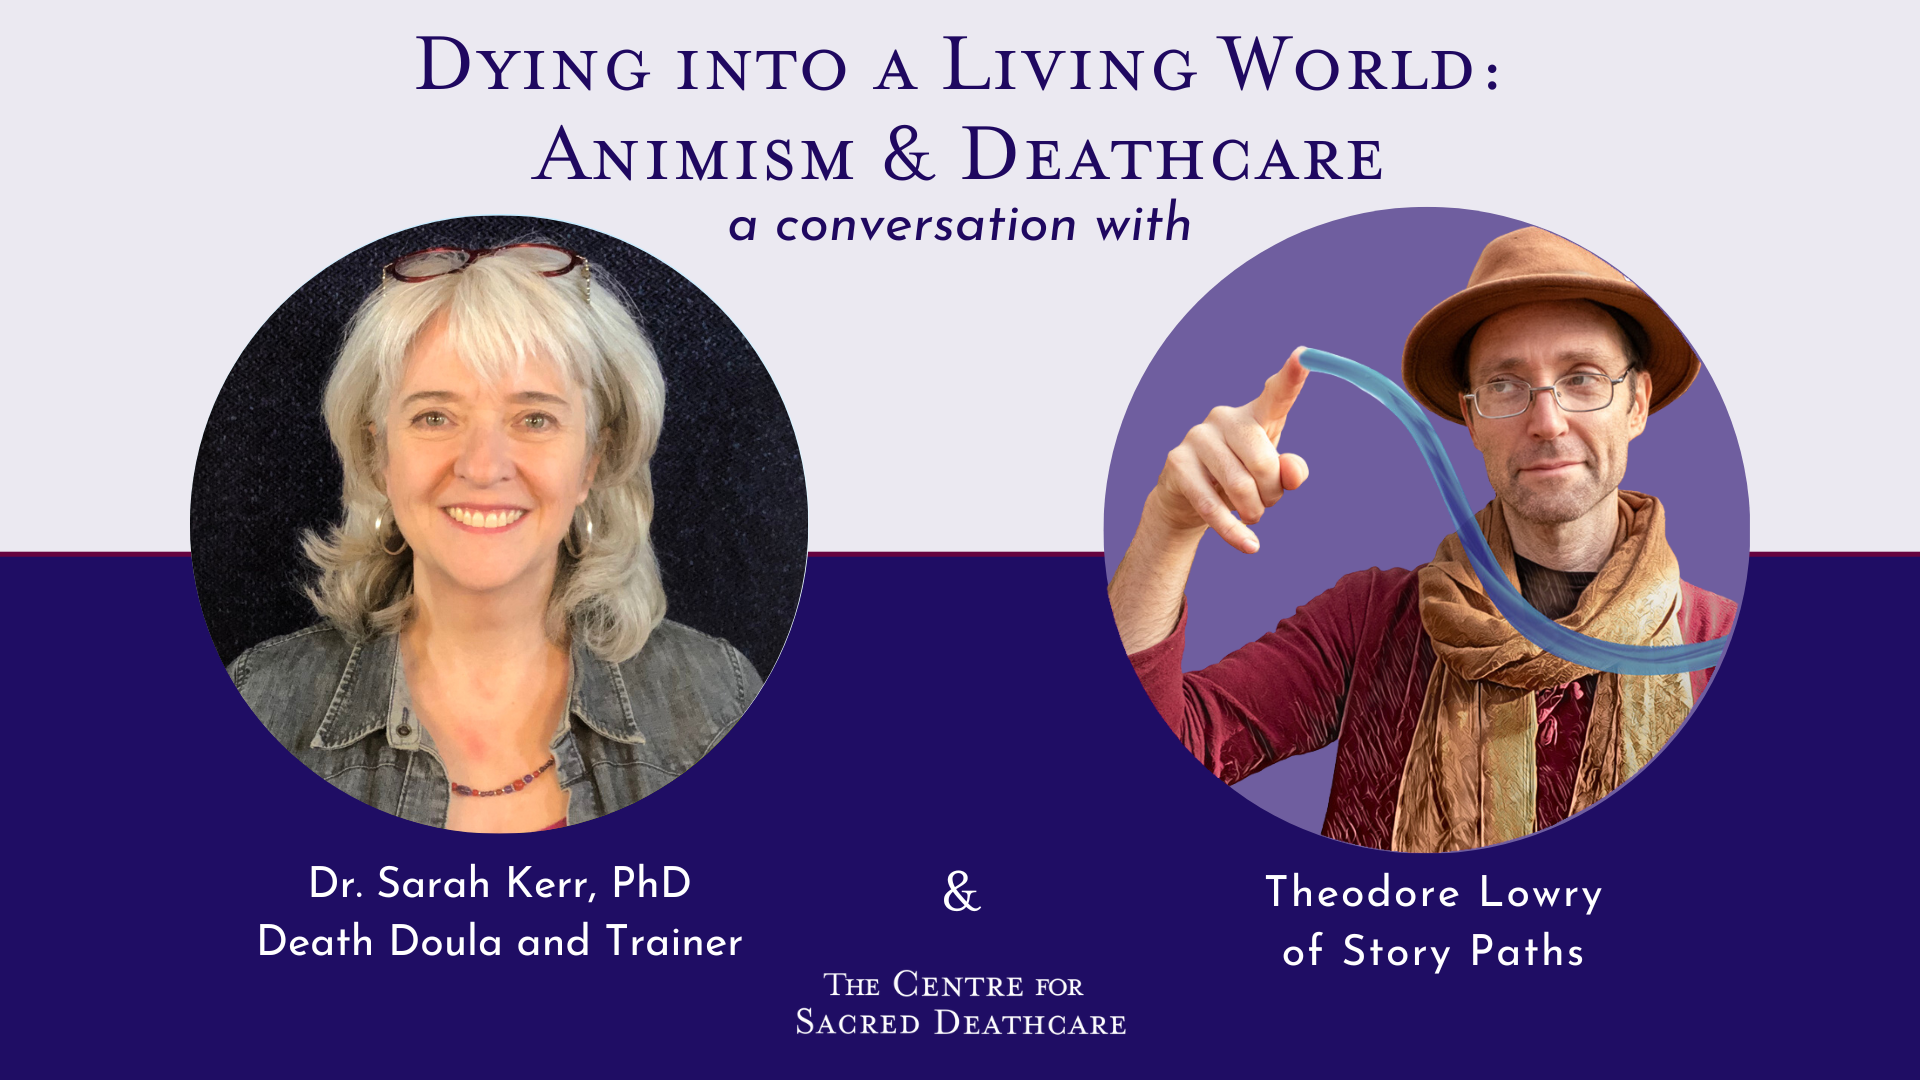 Dying into a Living World: Animism and Deathcare